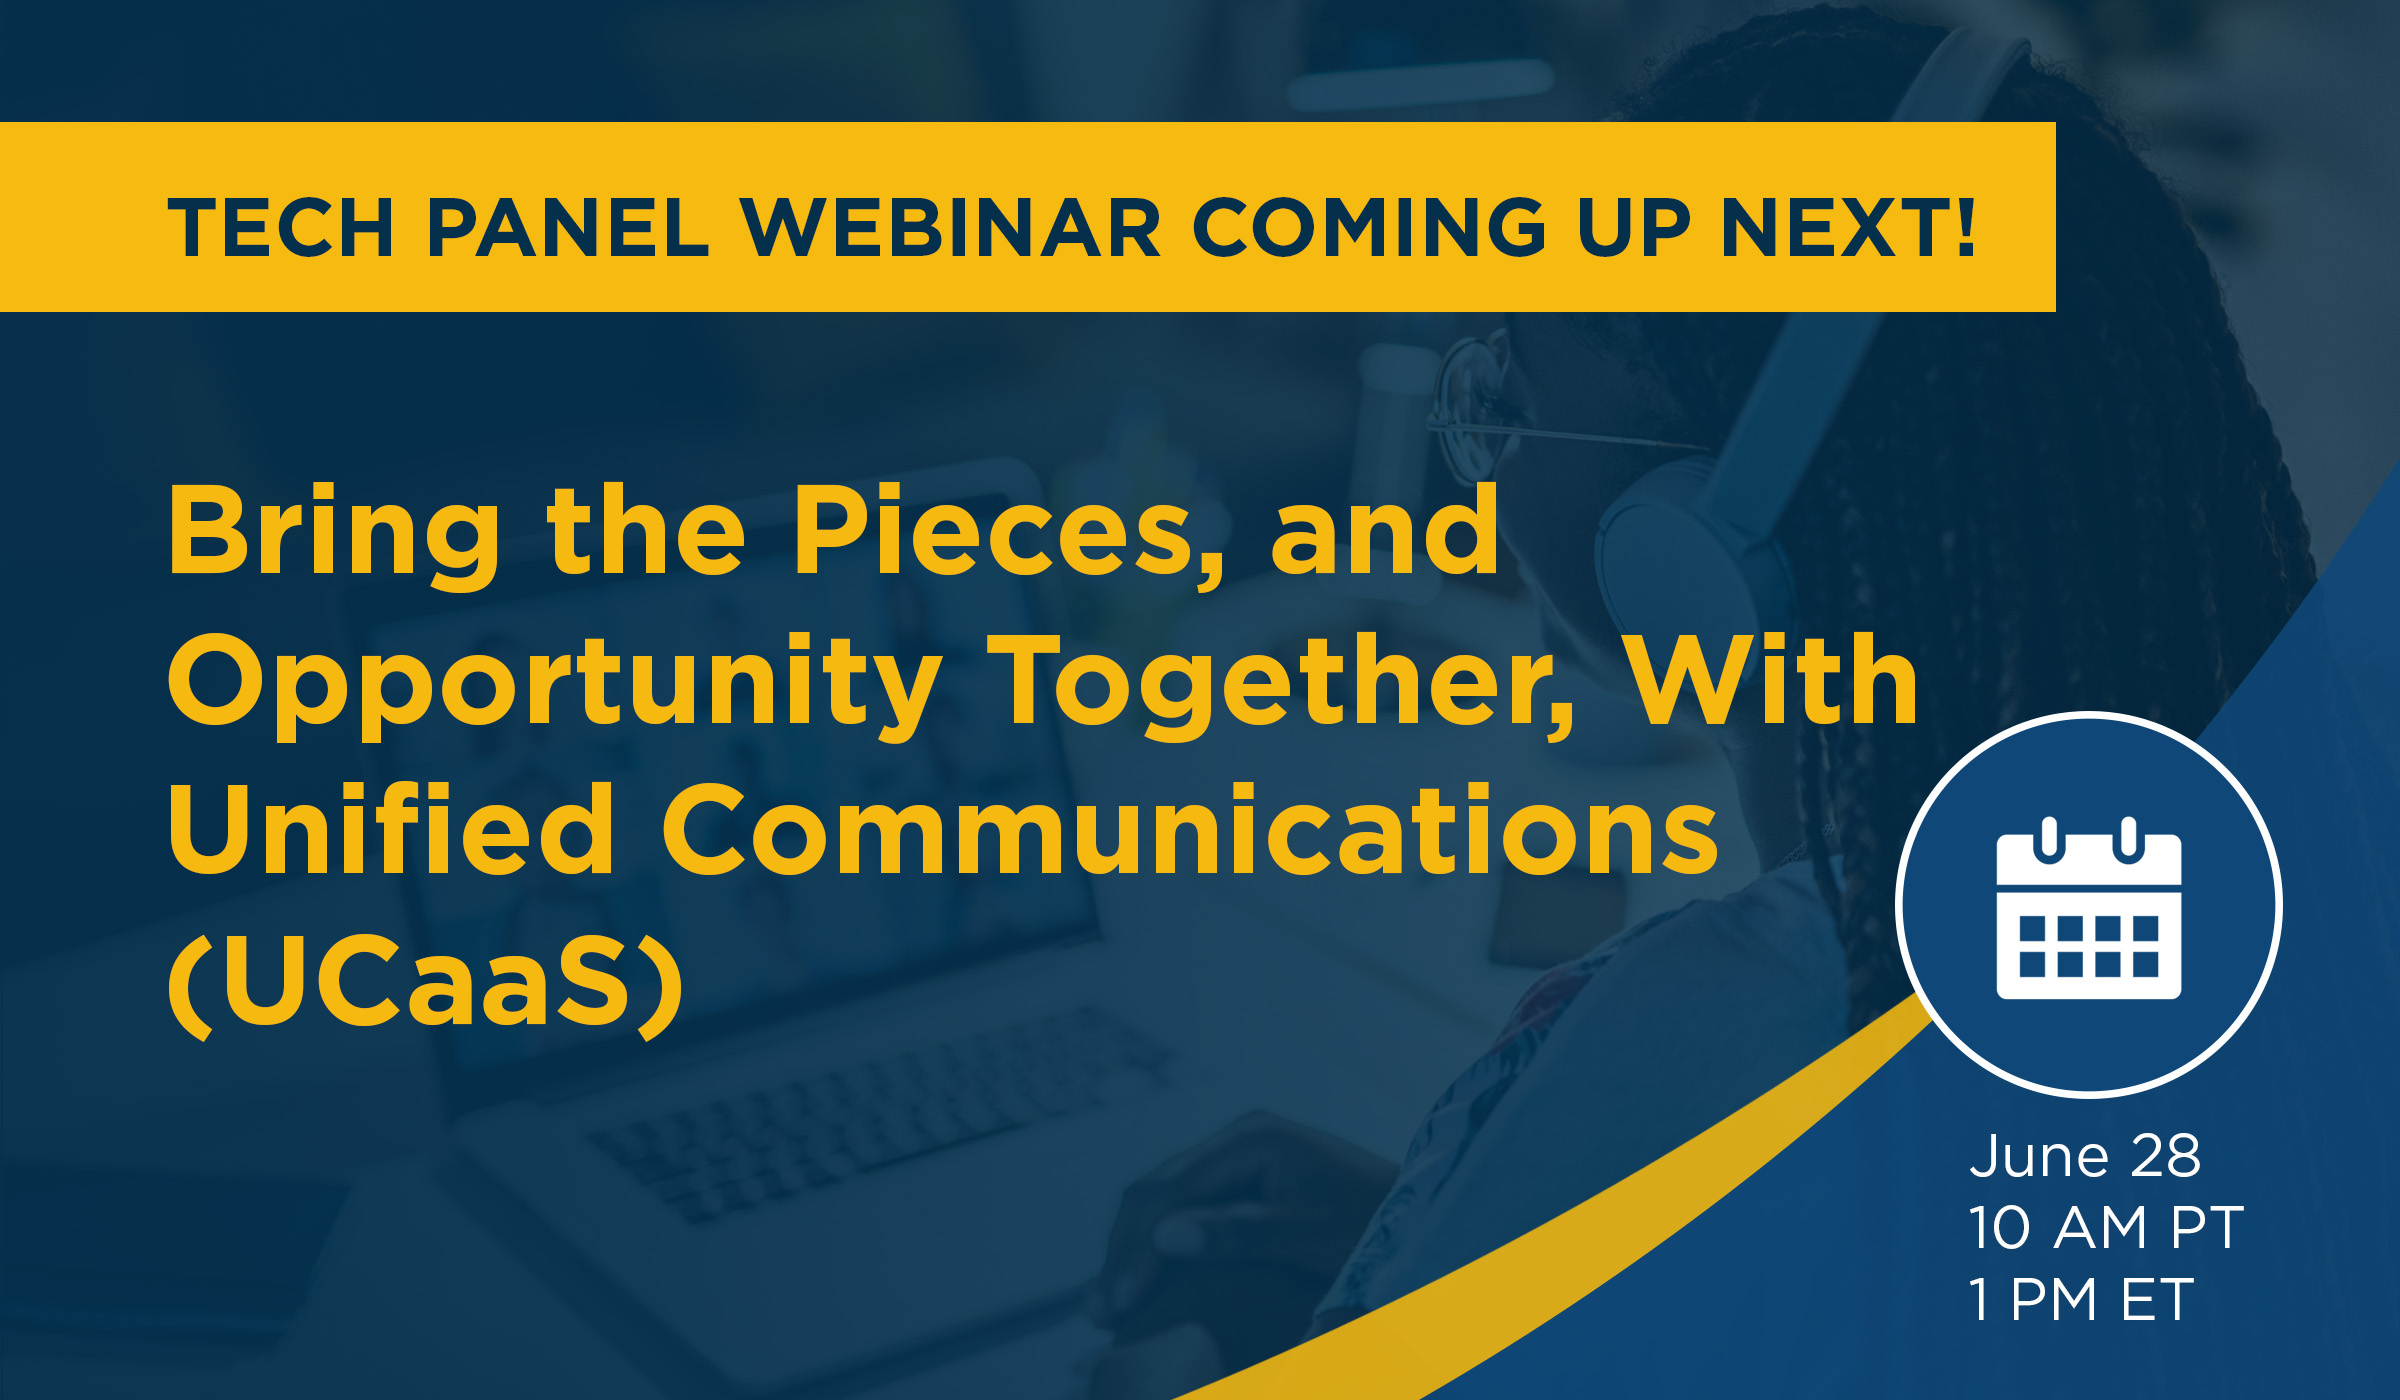 Bring the Pieces, and Opportunity Together, With Unified Communications (UCaaS)